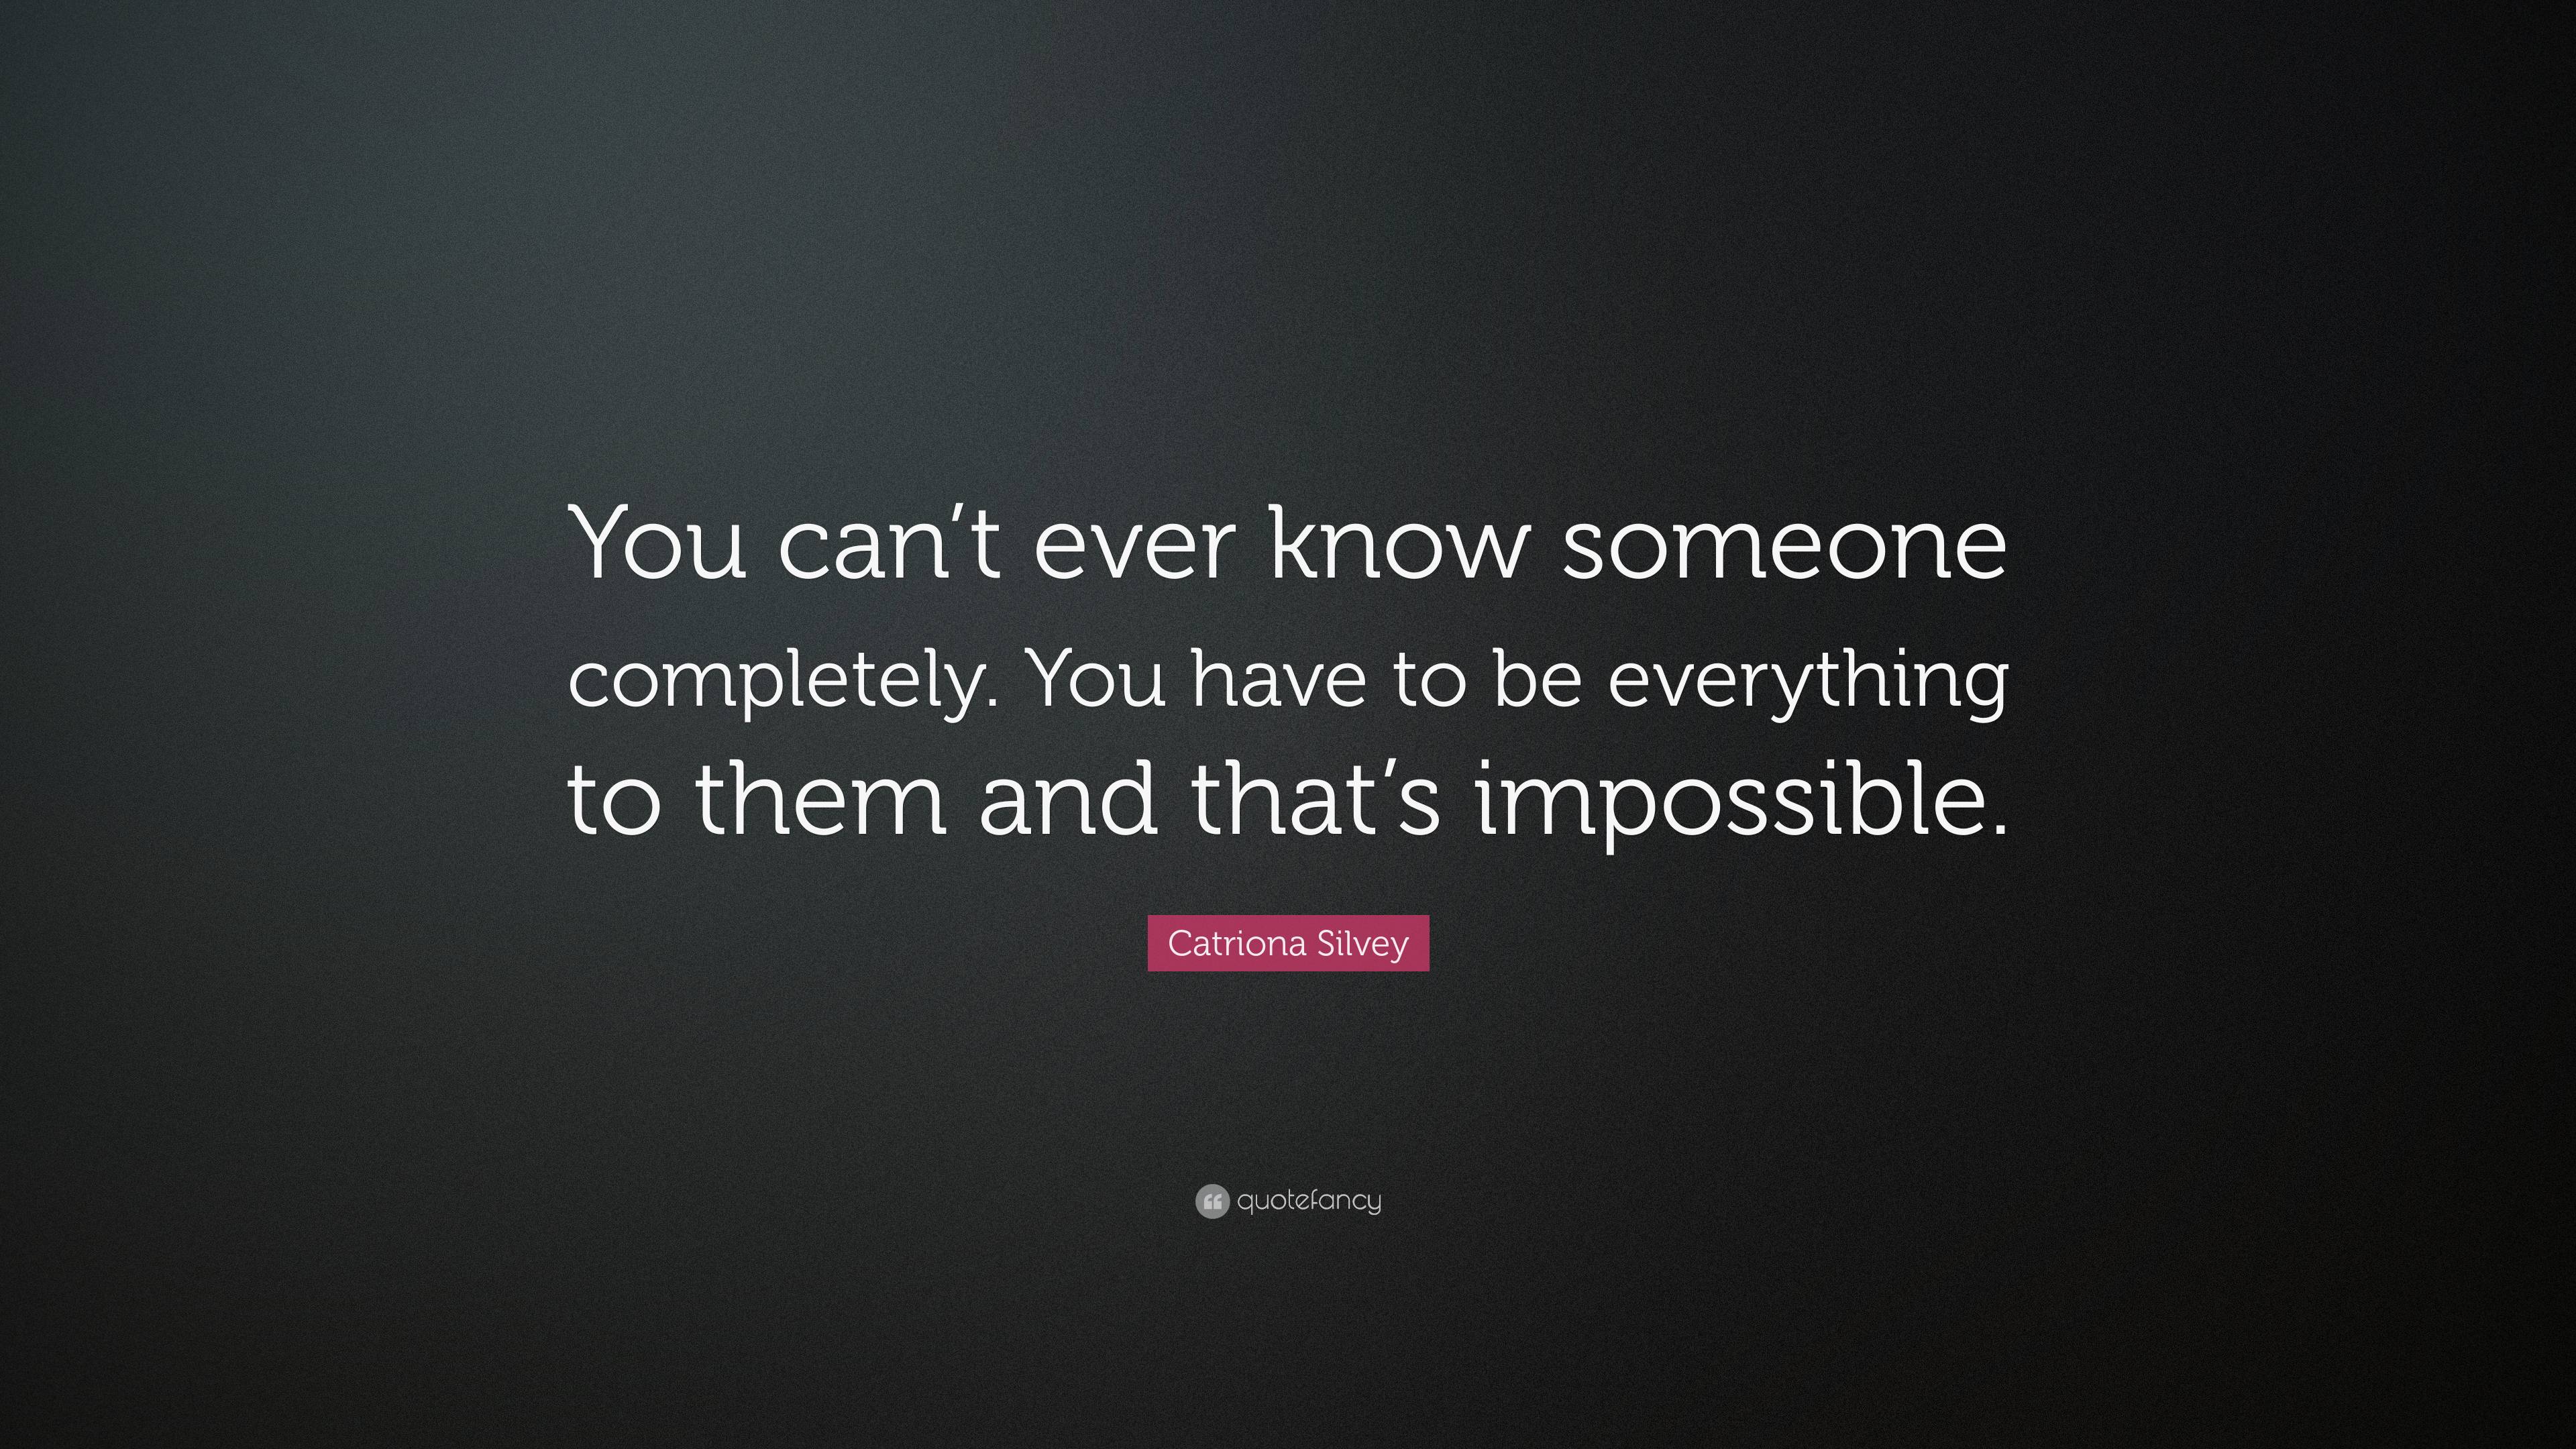 Catriona Silvey Quote: “You can’t ever know someone completely. You ...